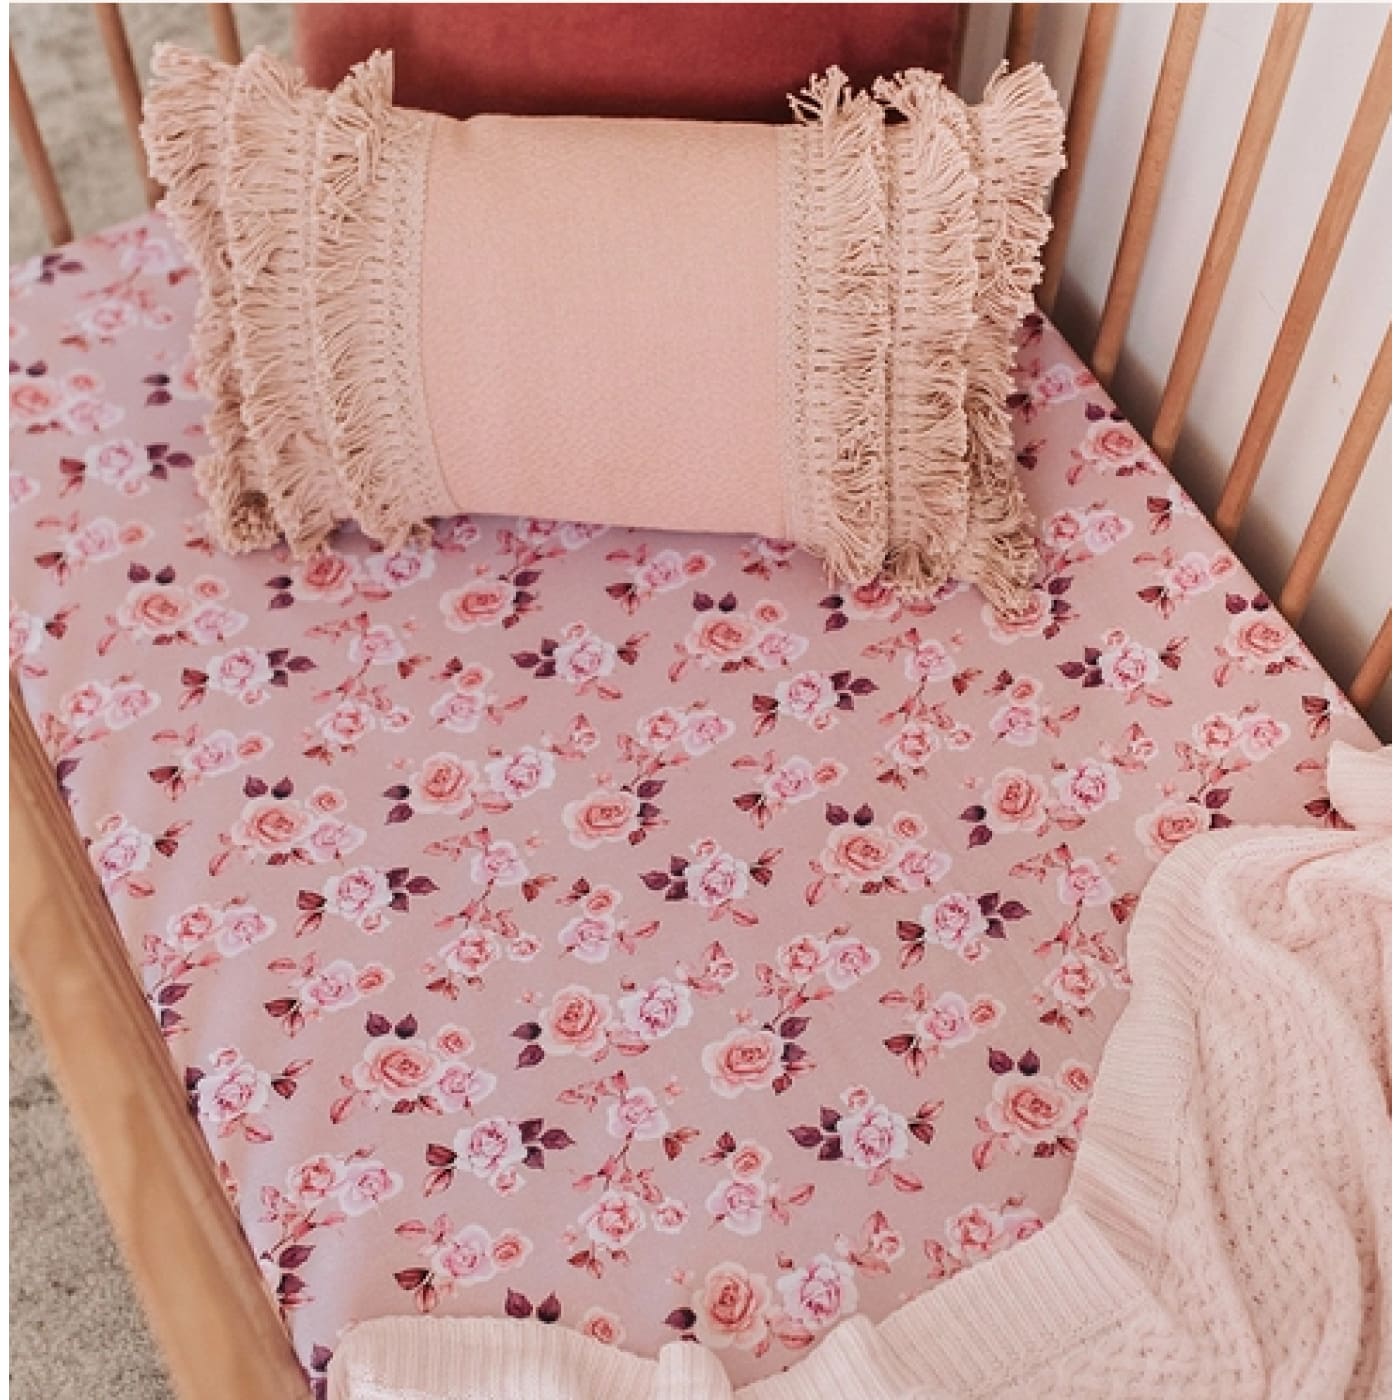 Snuggle Hunny Kids Fitted Cot Sheet - Blossom - Blossom - NURSERY & BEDTIME - COT MANCHESTER